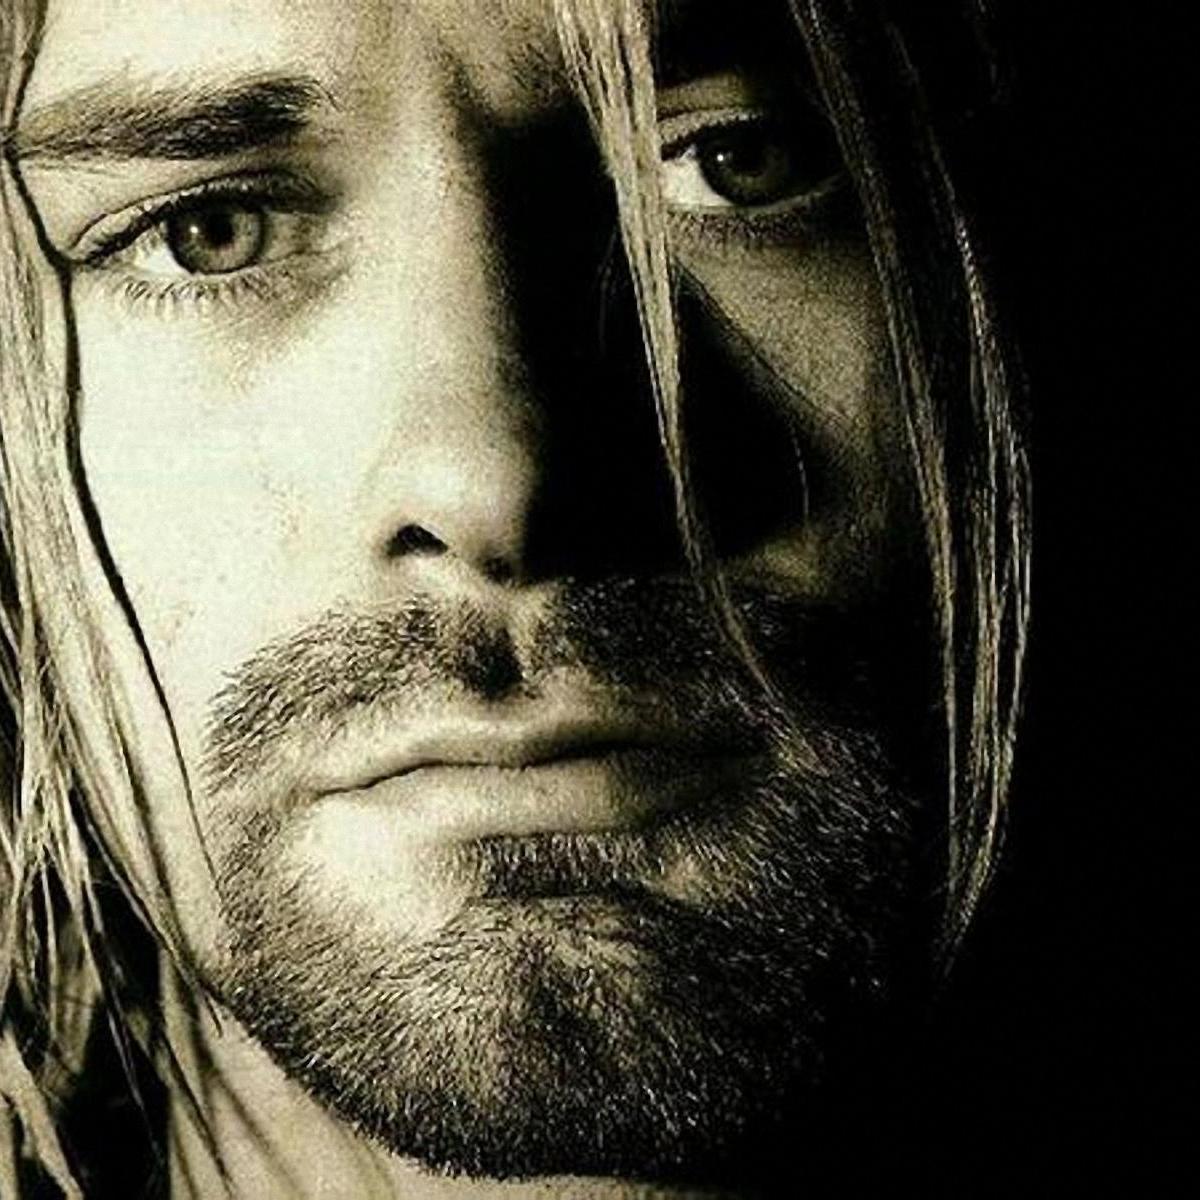 Kurt Cobain Quotes tweeted every day